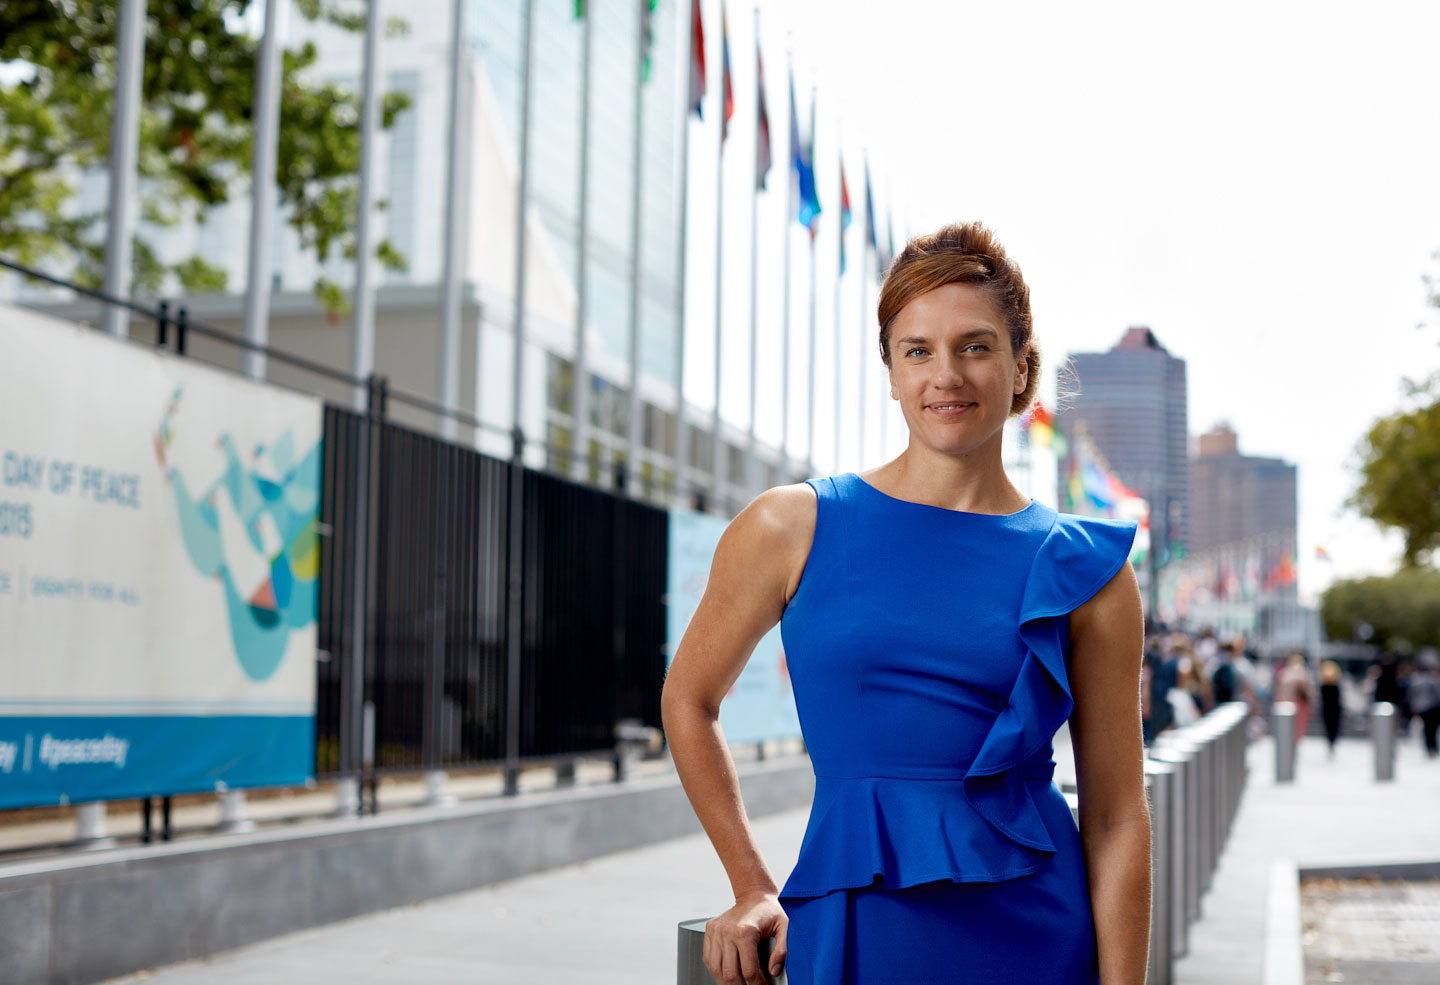 Sarah Irene, United Nations Interpreter. Photographed at the UN in New York City. September, 2015. Click images to enlarge.